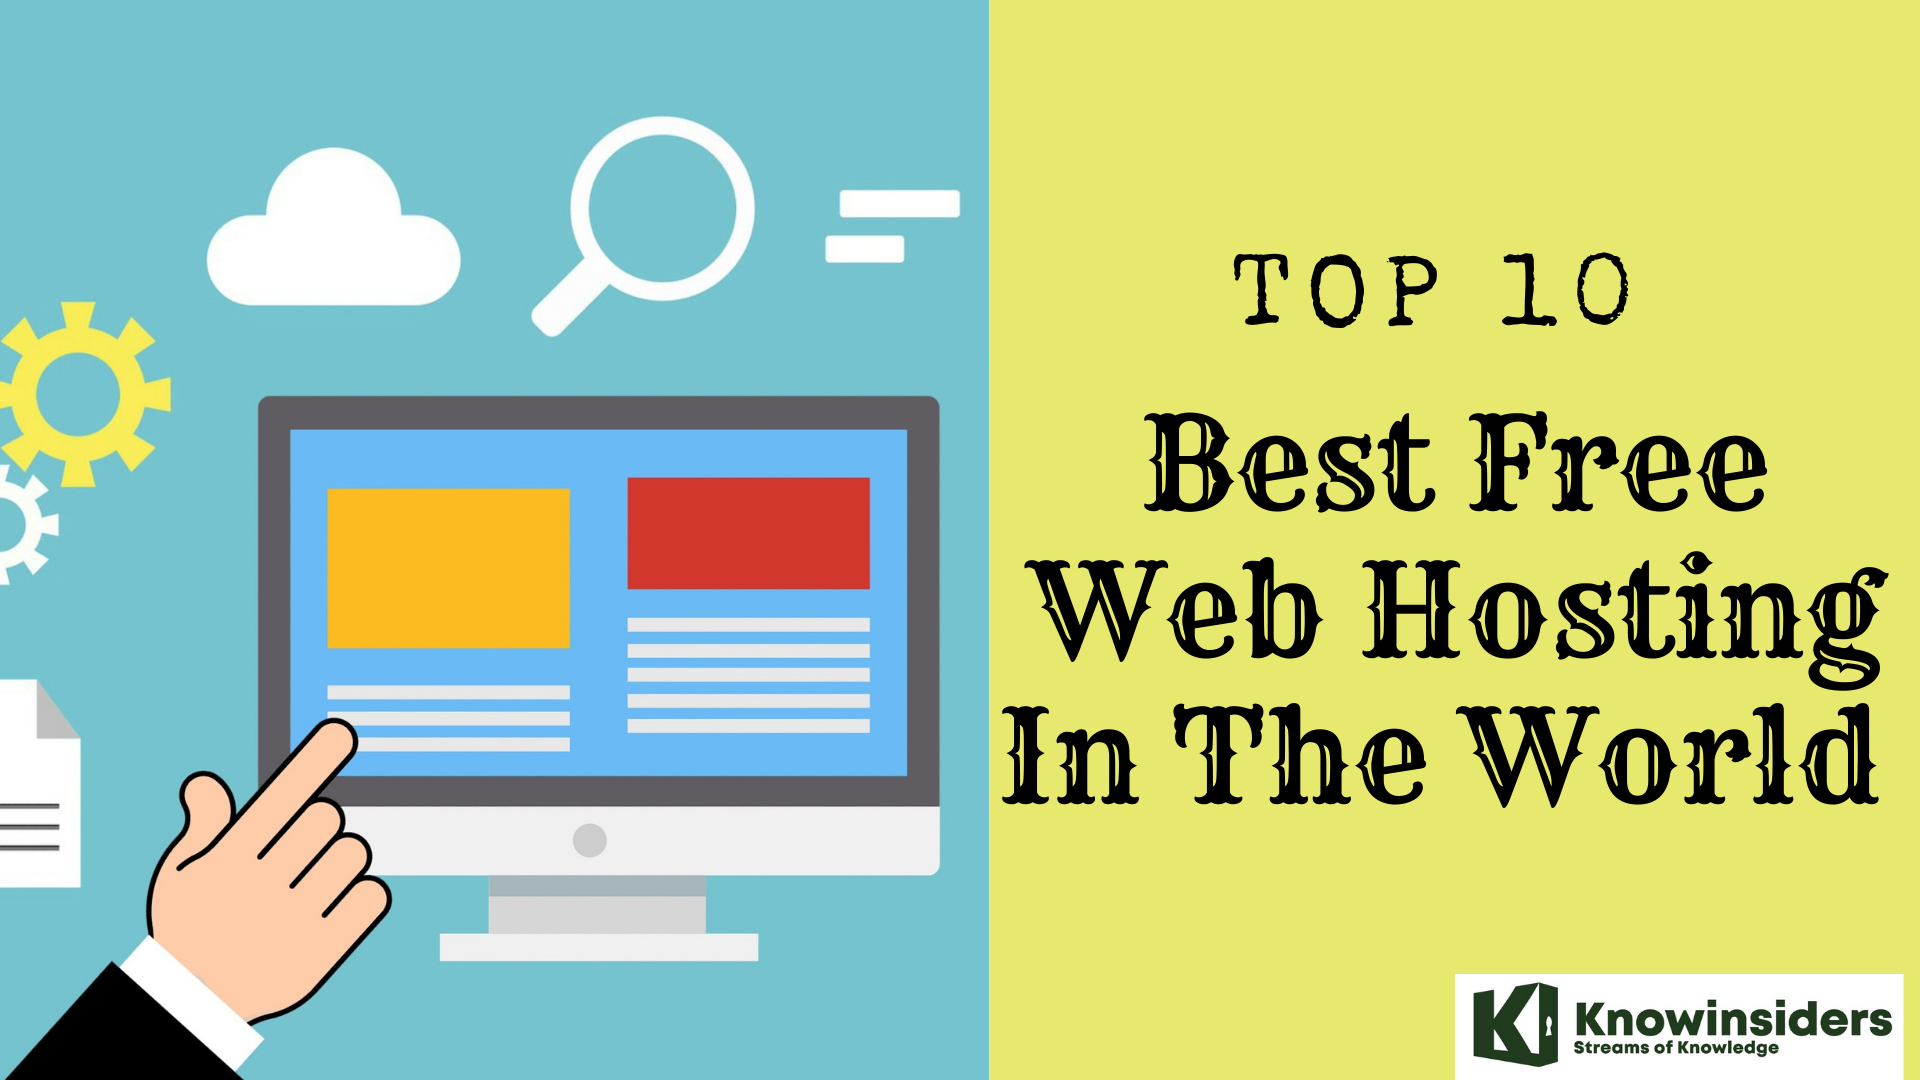 Top 10 Best Free Web Hosting In The World